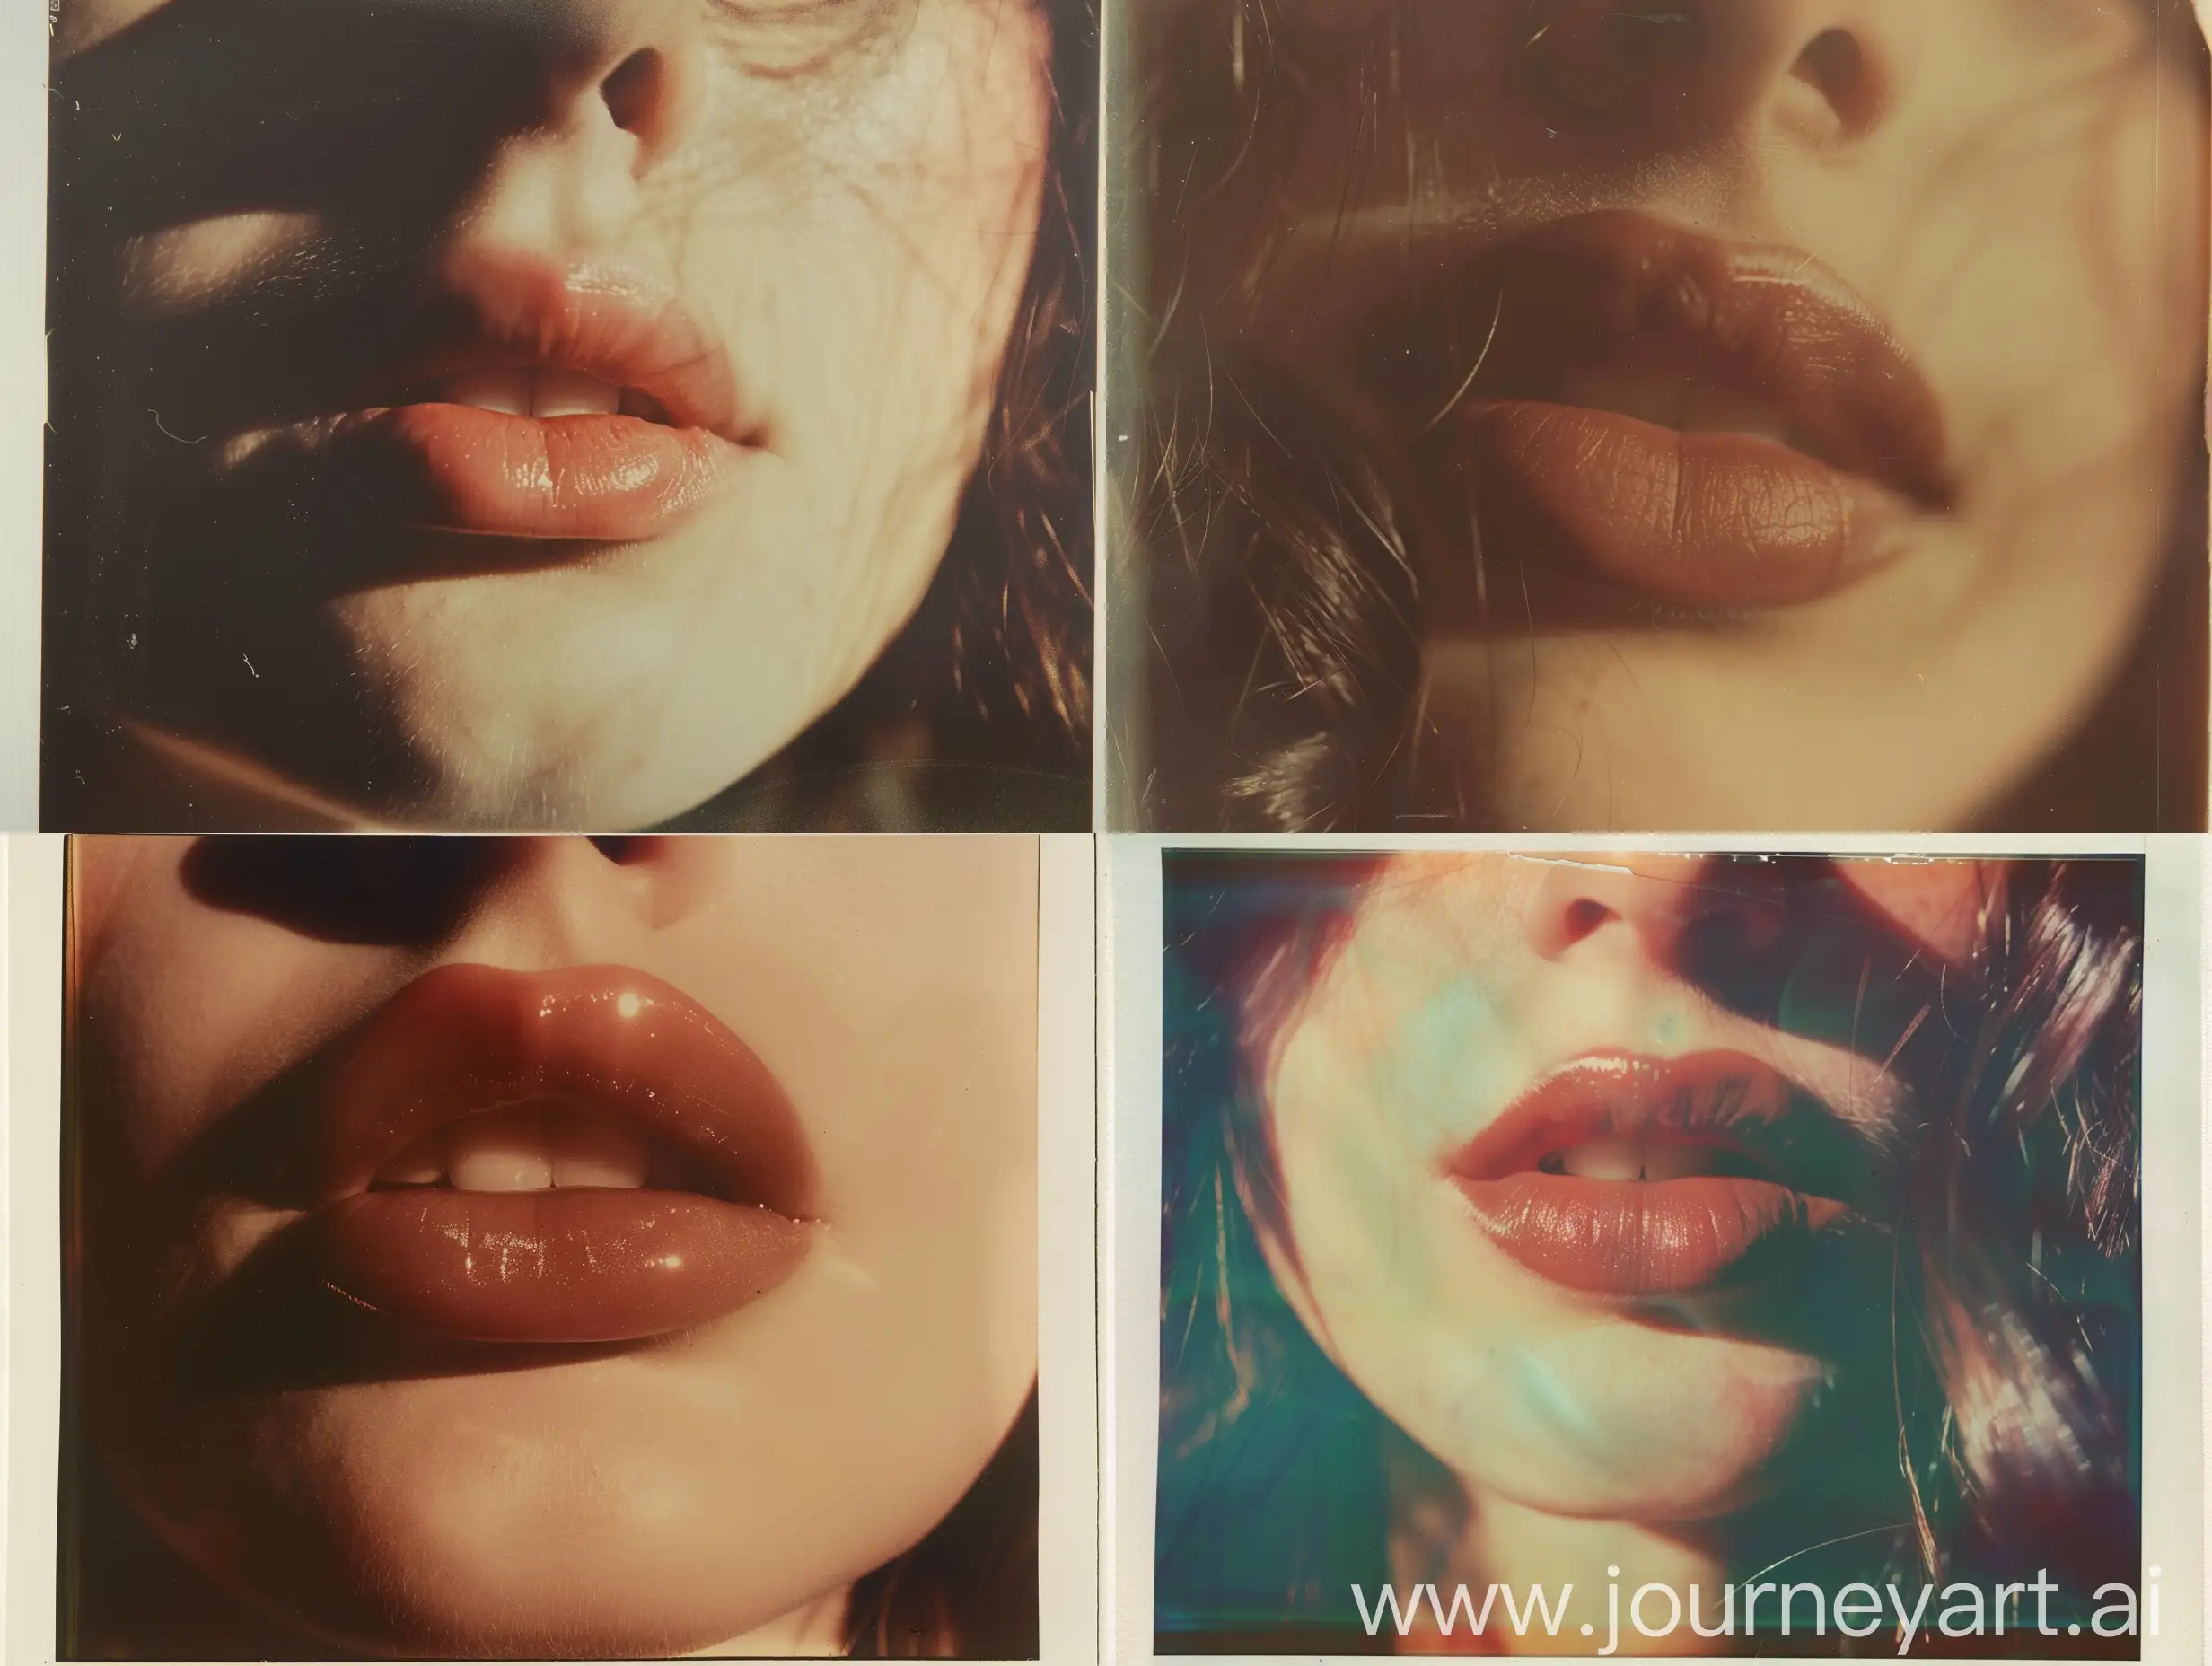 Closeup-Portrait-of-Gracie-Abramss-Lips-in-Vintage-Polaroid-Style